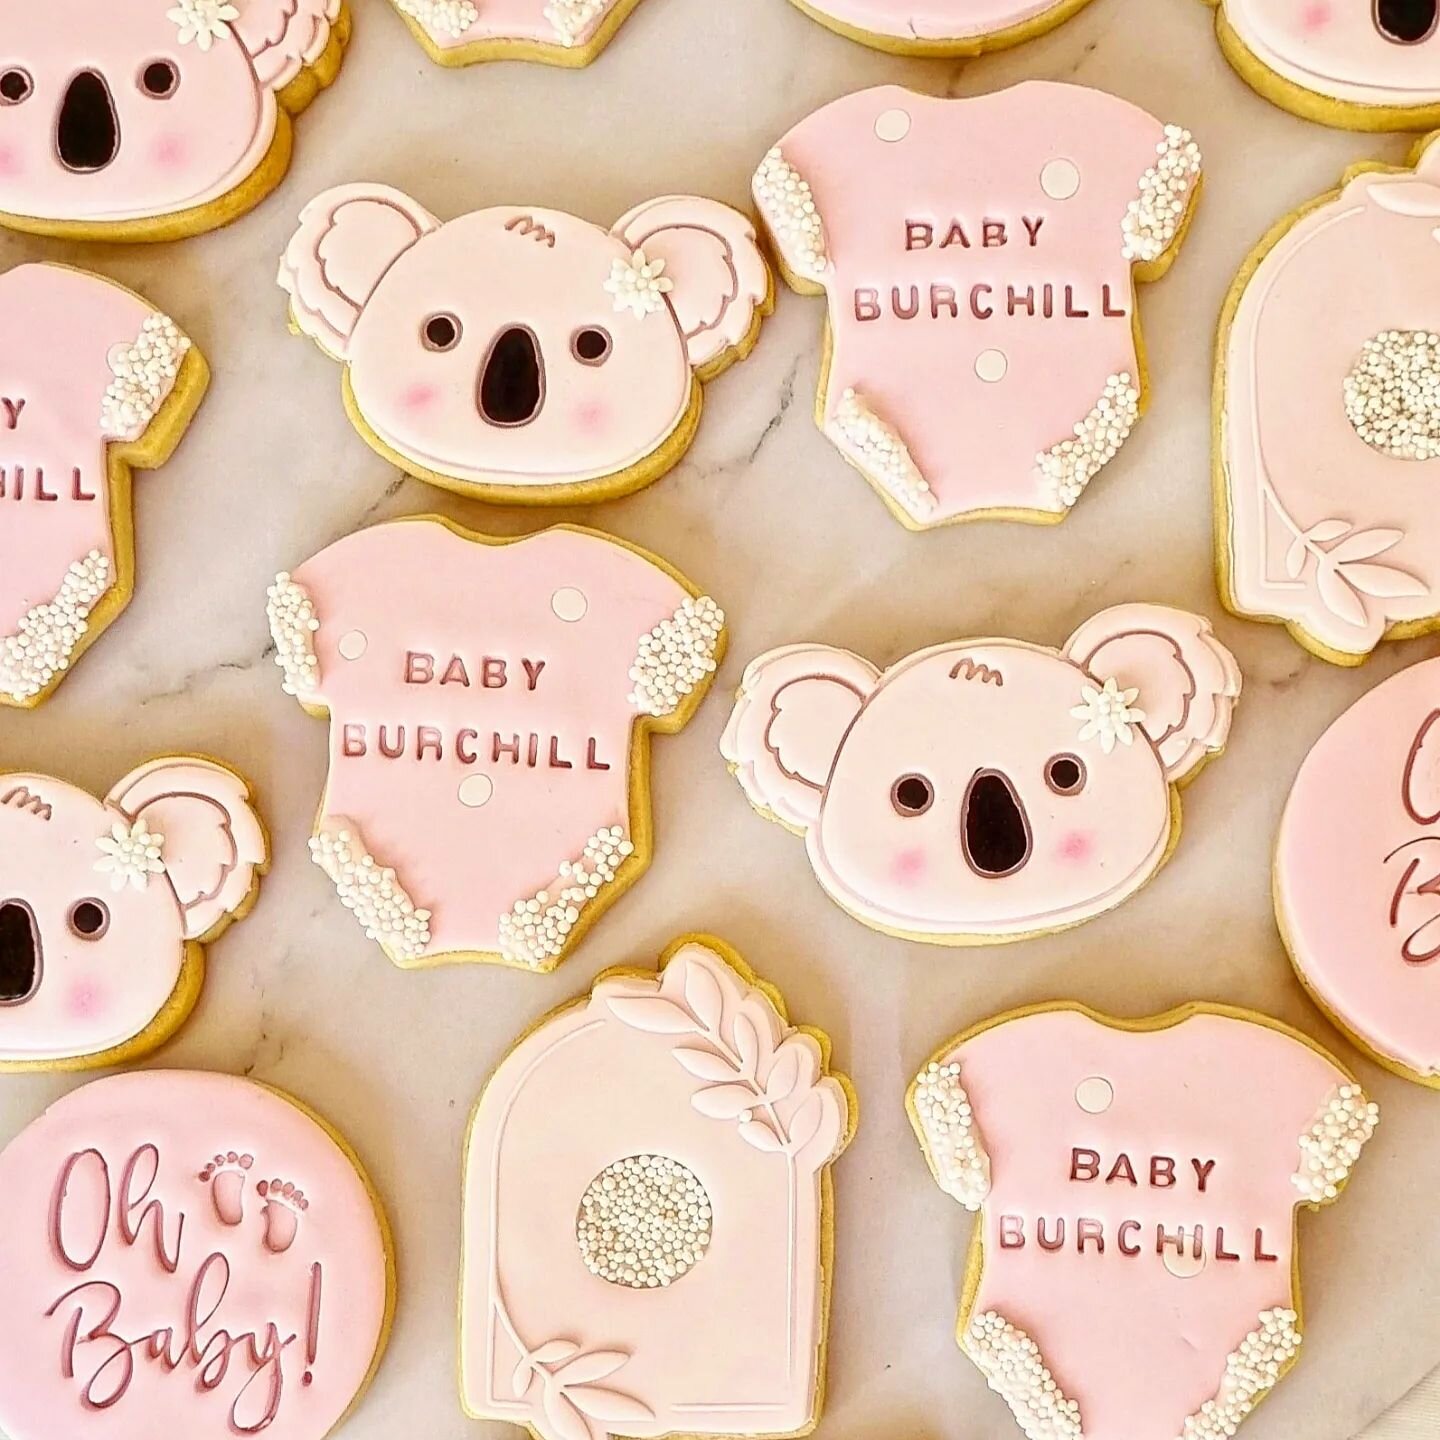 Baby BURCHILL💜

I simply love making cakes, cupcakes, edible flower lollipops and cookies for baby showers.
Just the thought of a precious little bundle of love entering this world, makes my heart so happy💜

For your next special occasion cake or c